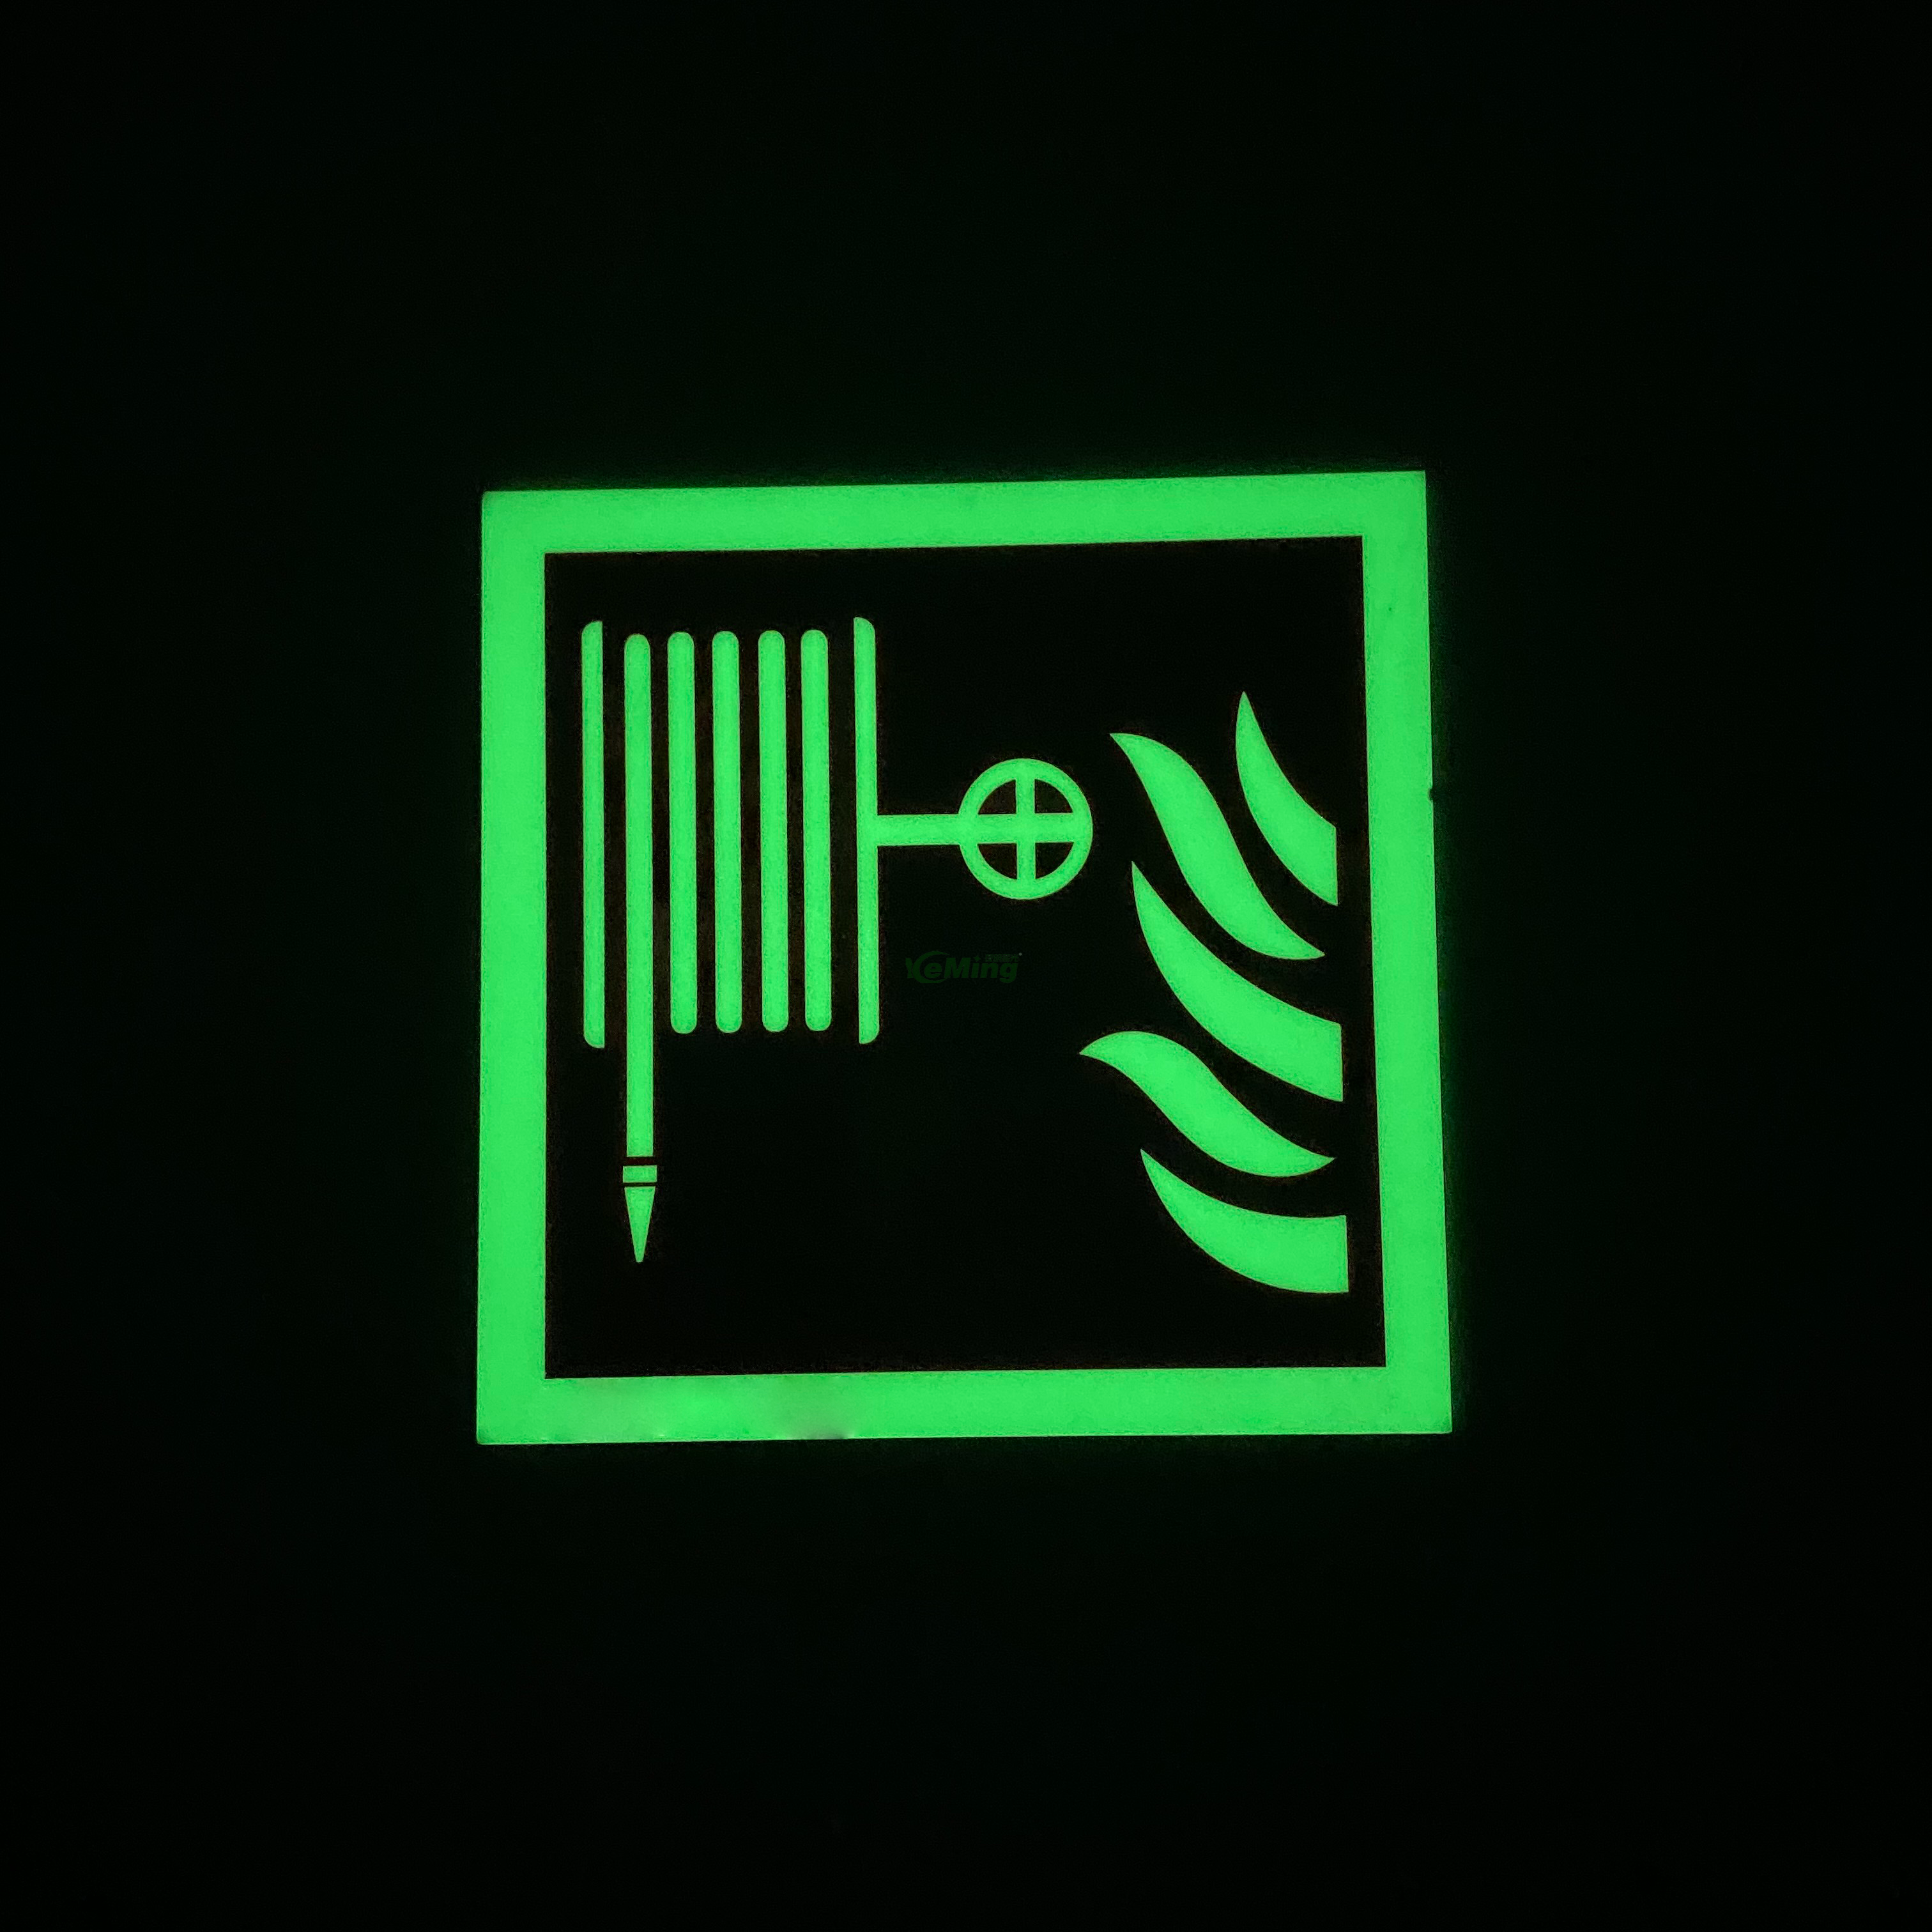 Fire Safety Hose Sign, Fire Sprinkler Water Sign, Red Signal, Fire Hose Reel Sign Glow in The Dark 